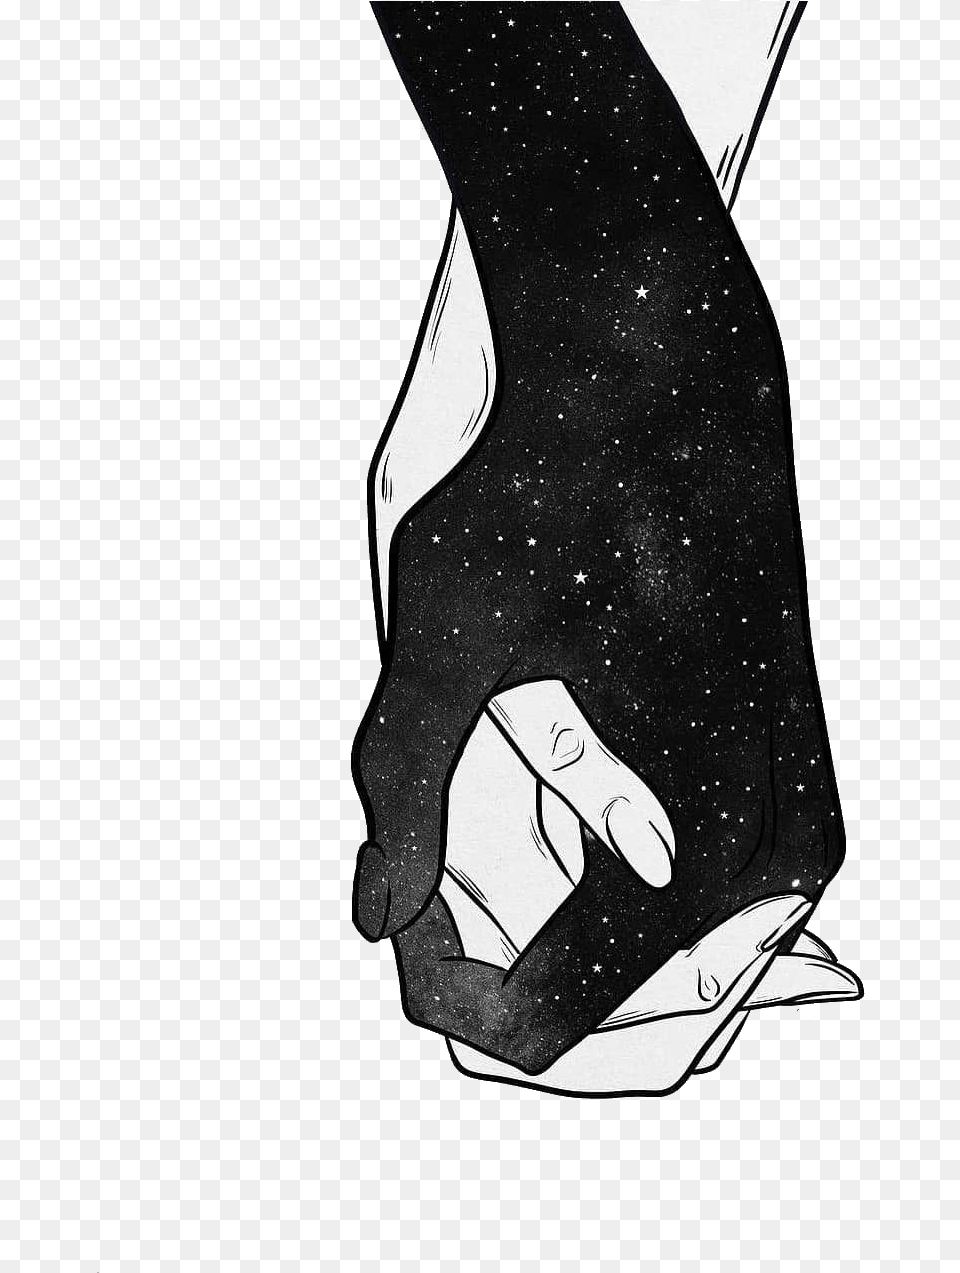 Galaxy Flower Tumblr Sticker Gardening Flower And Vegetables Aesthetic Black And White, Body Part, Hand, Person, Art Free Transparent Png